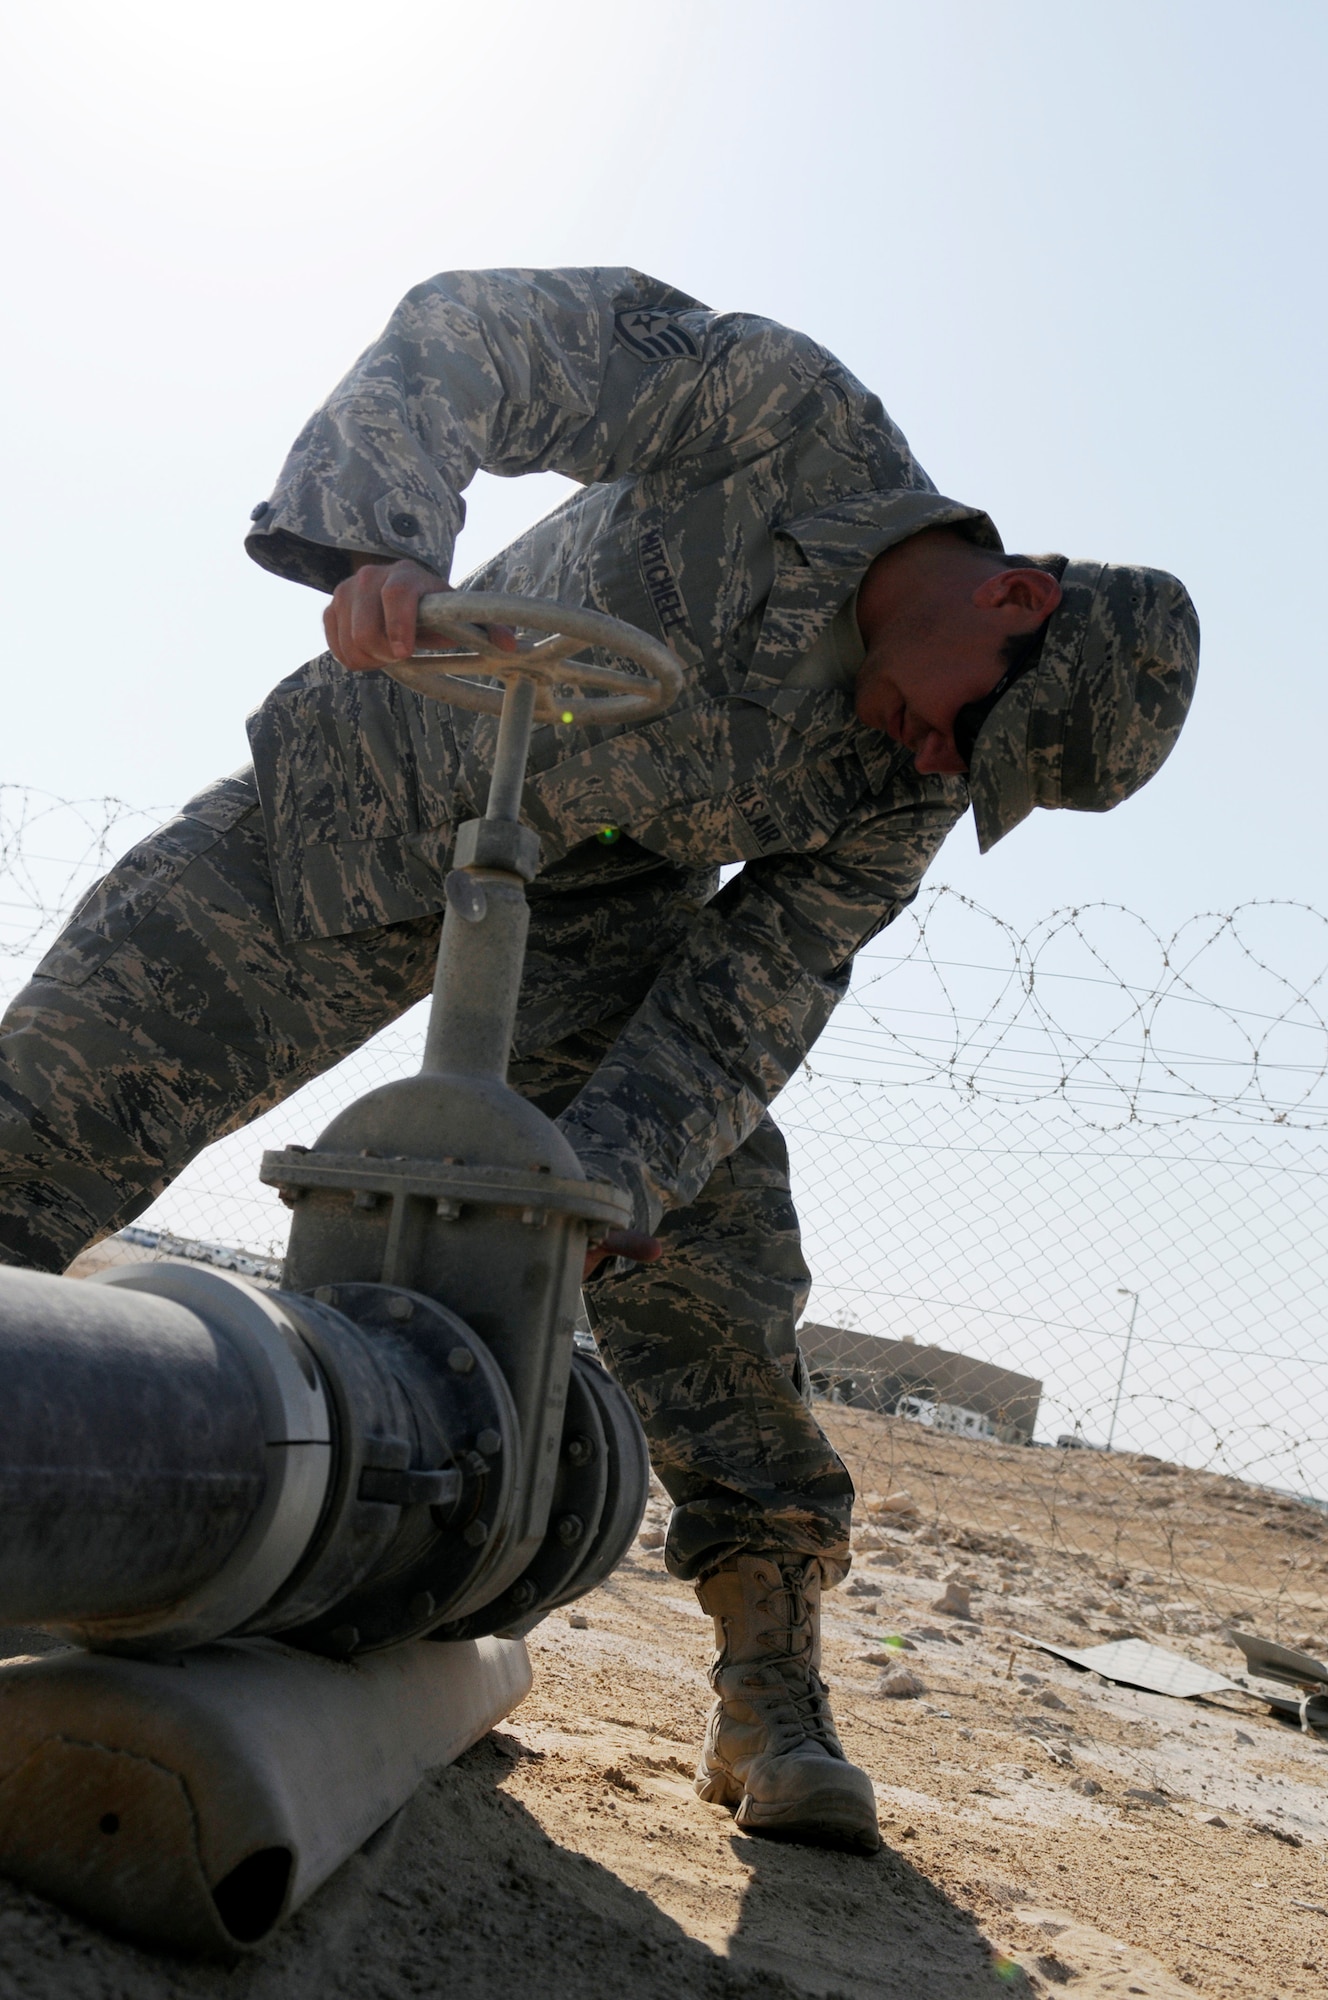 Staff Sgt. George Mitchell, fuels craftsman assigned to the 379th Expeditionary Logistics Readiness Squadron, inspects a gate valve which had earlier developed a small leak.  The inspection is part of a security and leak check of the fuel pipeline from bulk storage to operating storage, Nov. 14, at an undisclosed air base in Southwest Asia.  "Running the line" is a preventative procedure that keeps the fuel flowing to "fuel the fight."  Approximately one million gallons of fuel are moved each day through the 379 ELRS fuels section, keeping aircraft flying in Operations Iraqi and Enduring Freedom and Joint Task Force-Horn of Africa.  Sergeant Mitchell, a native of Lady Lake, Fla., is deployed from Shaw Air Force Base, S.C.  (U.S. Air Force Base photo by Tech. Sgt. Michael Boquette/Released)